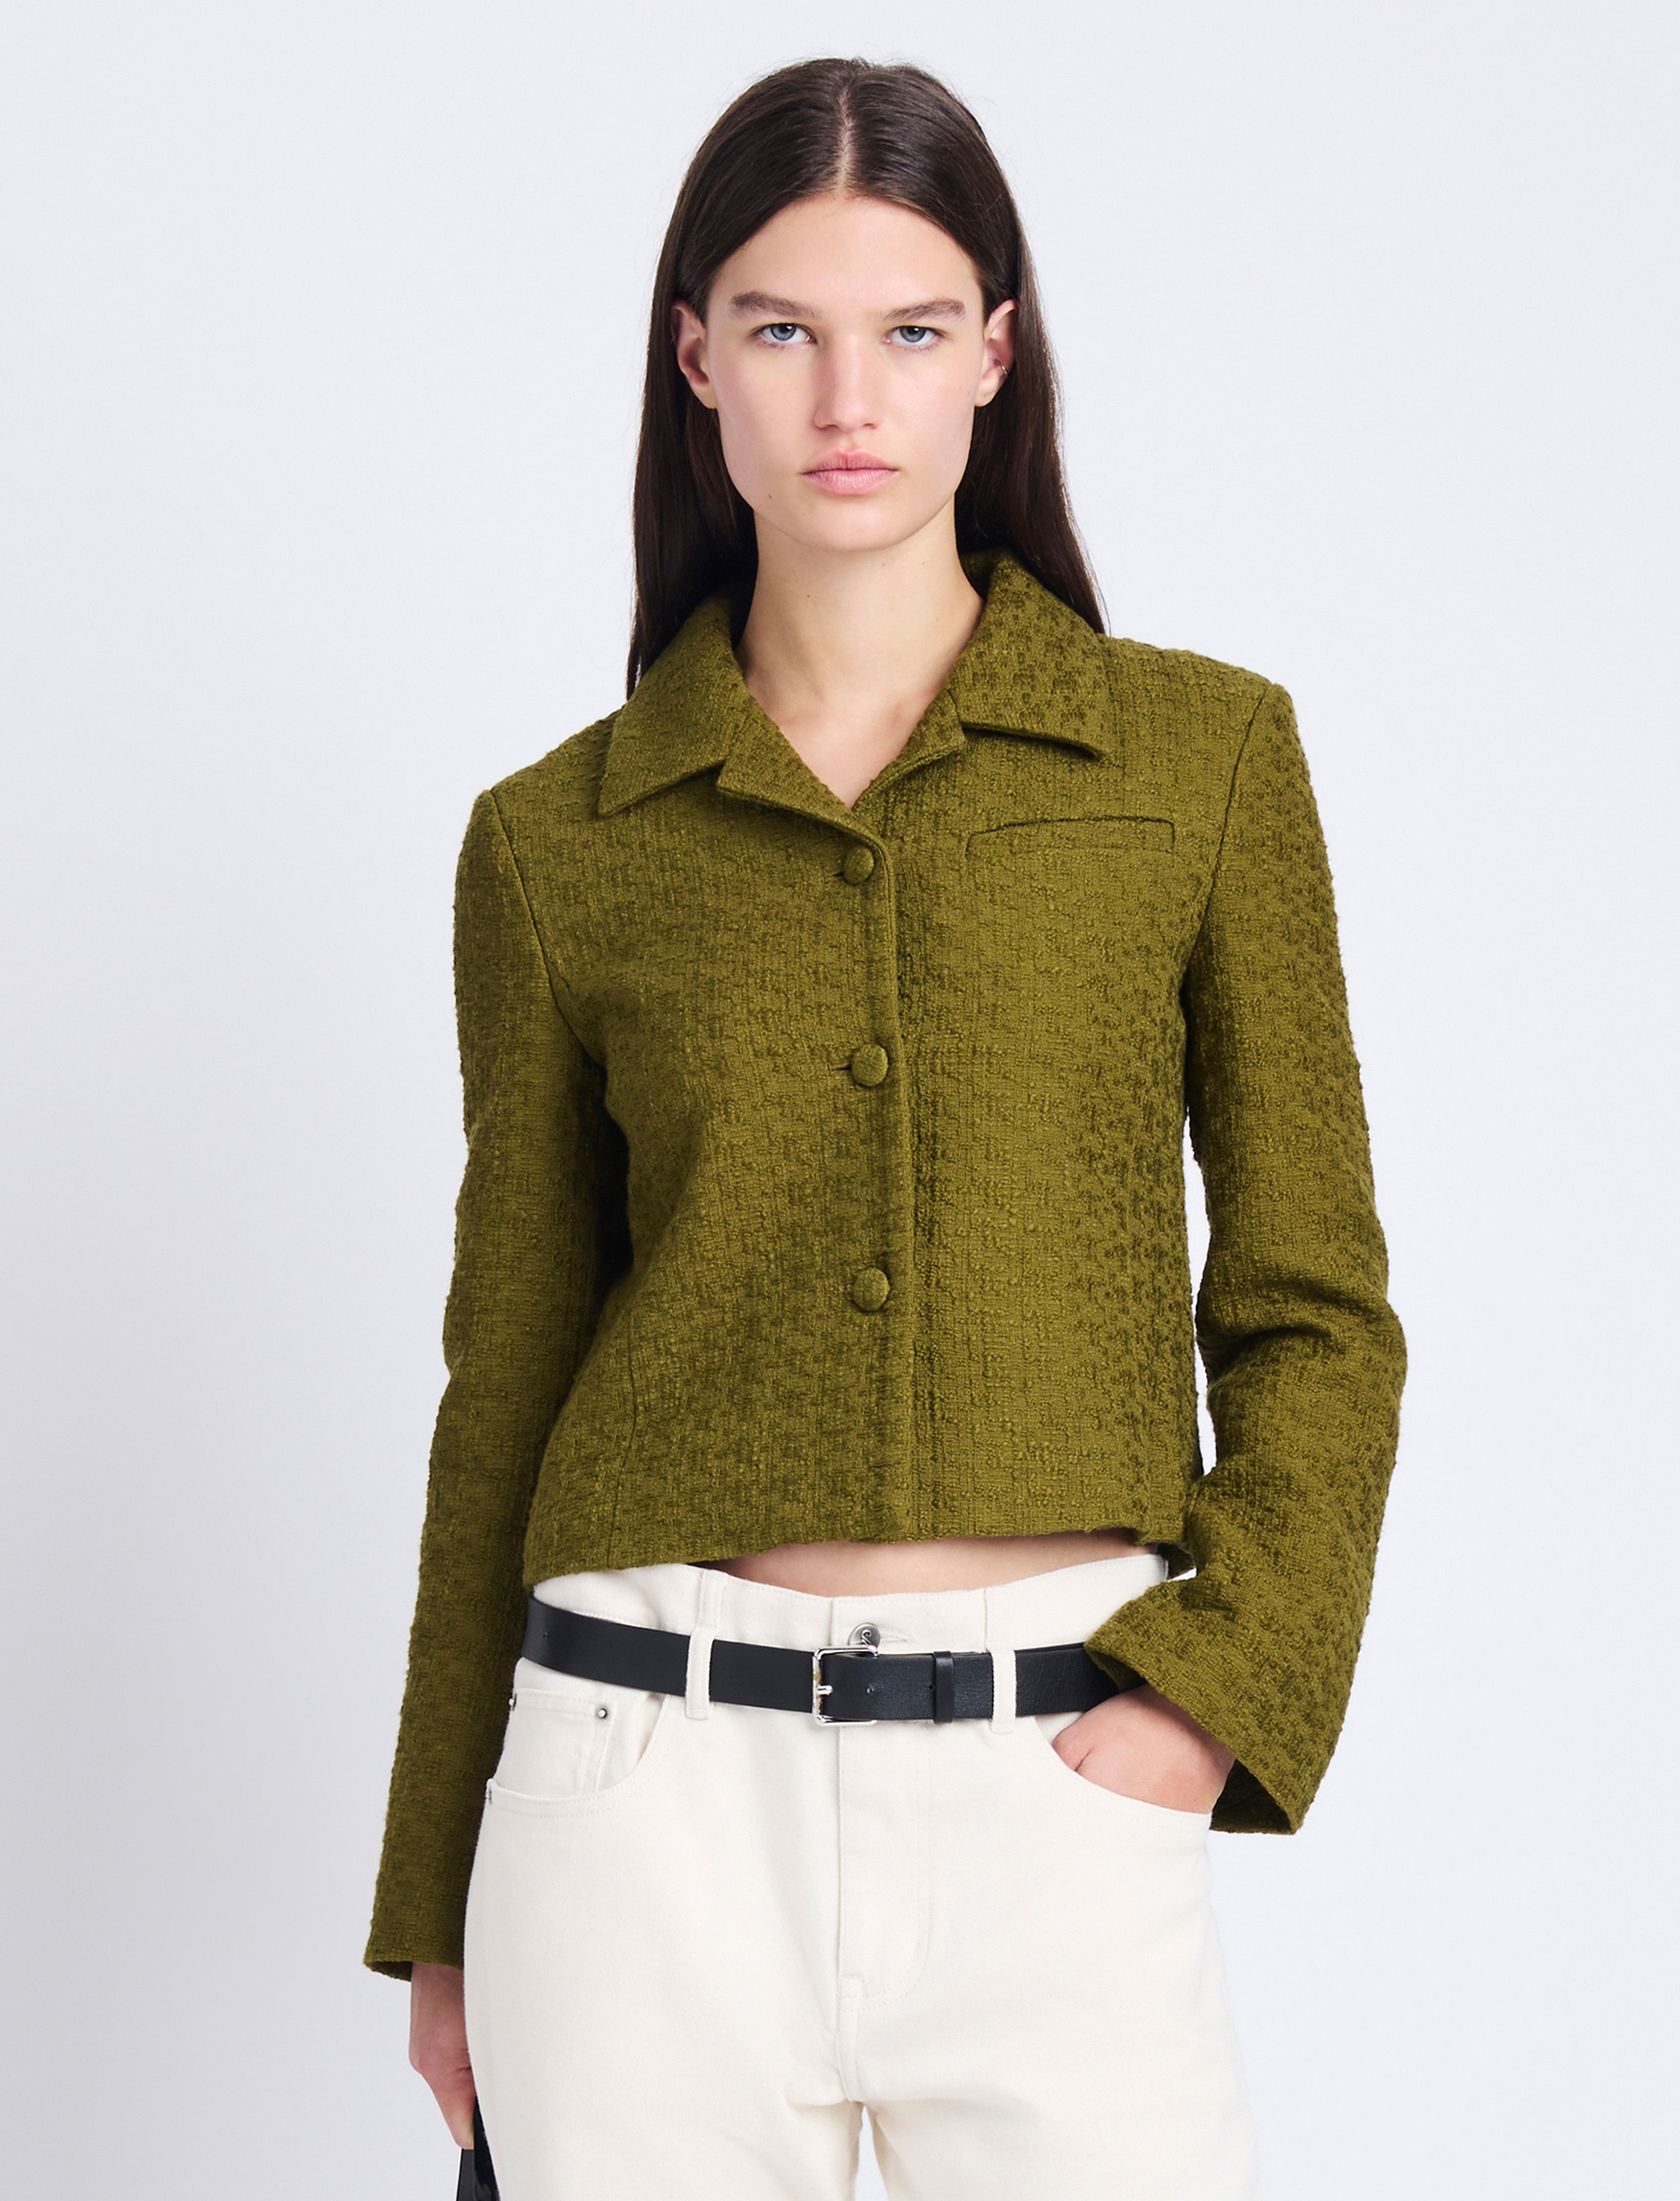 Proenza Schouler White Label cropped tweed jacket - Yellow